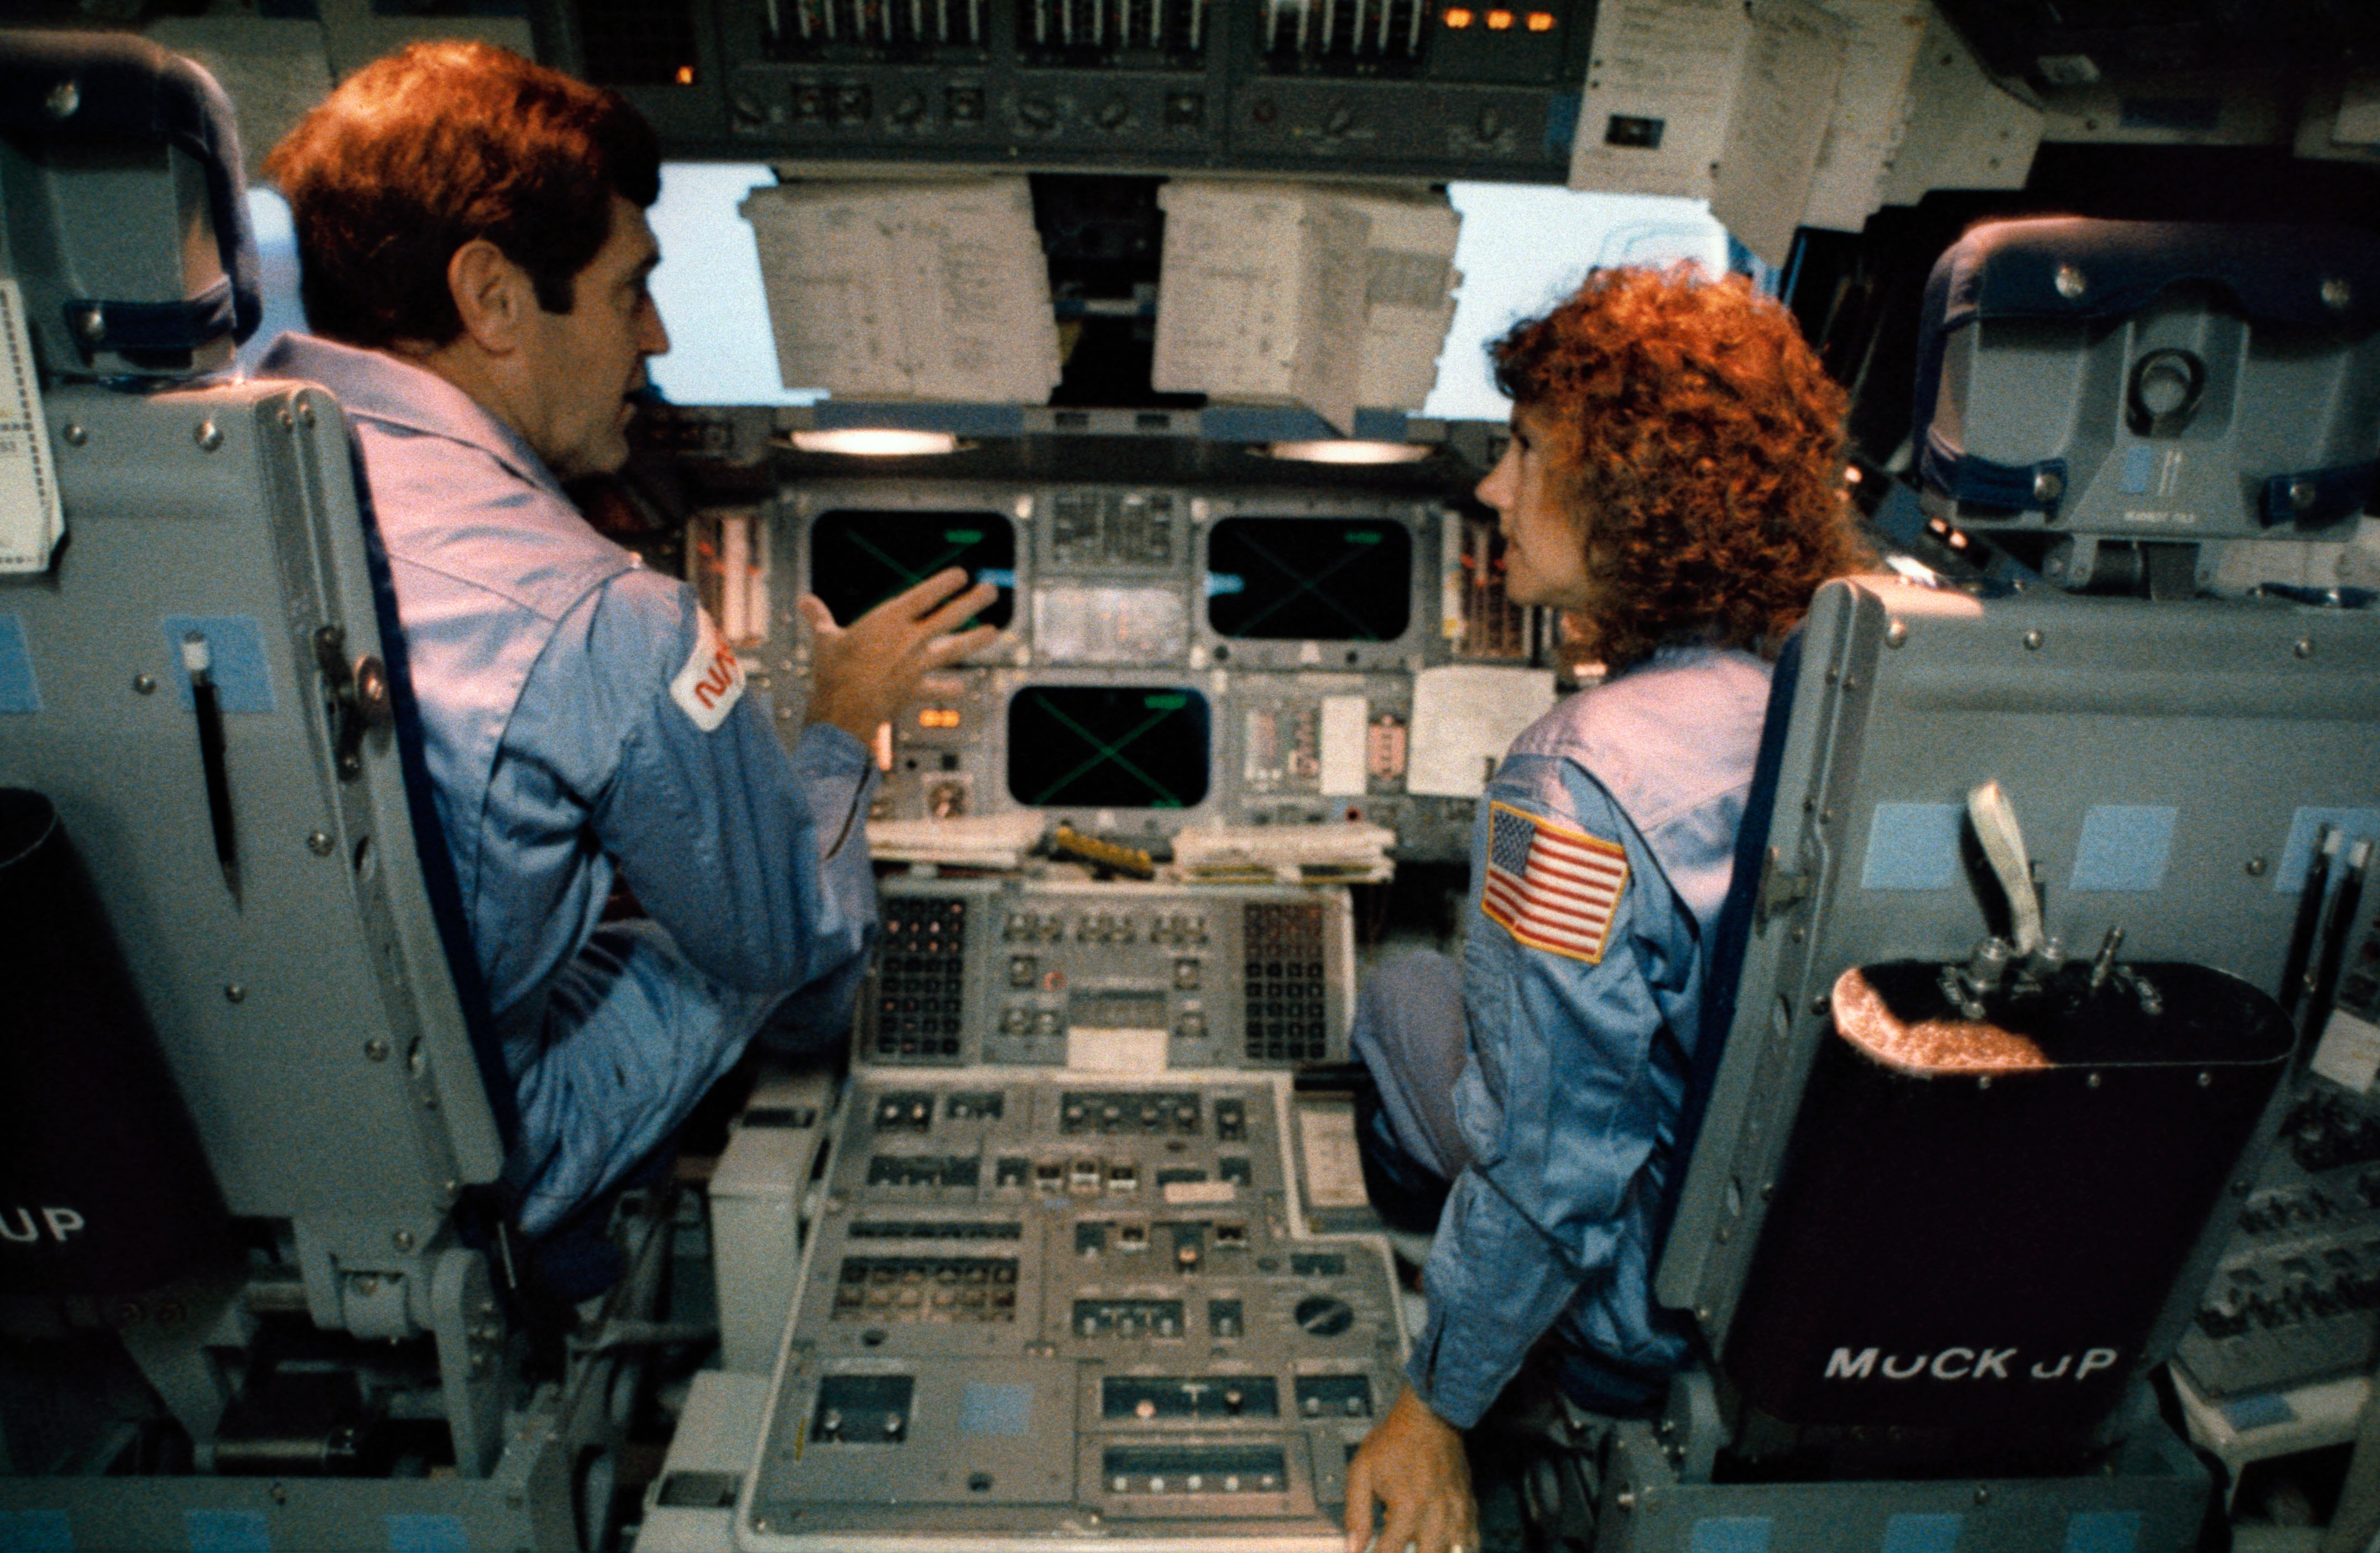 Mission 51L Commander Dick Scobee talks to schoolteacher Christa McAuliffe about the instrumentation of the shuttle's flight deck during pre-launch training. Photo Credit: NASA